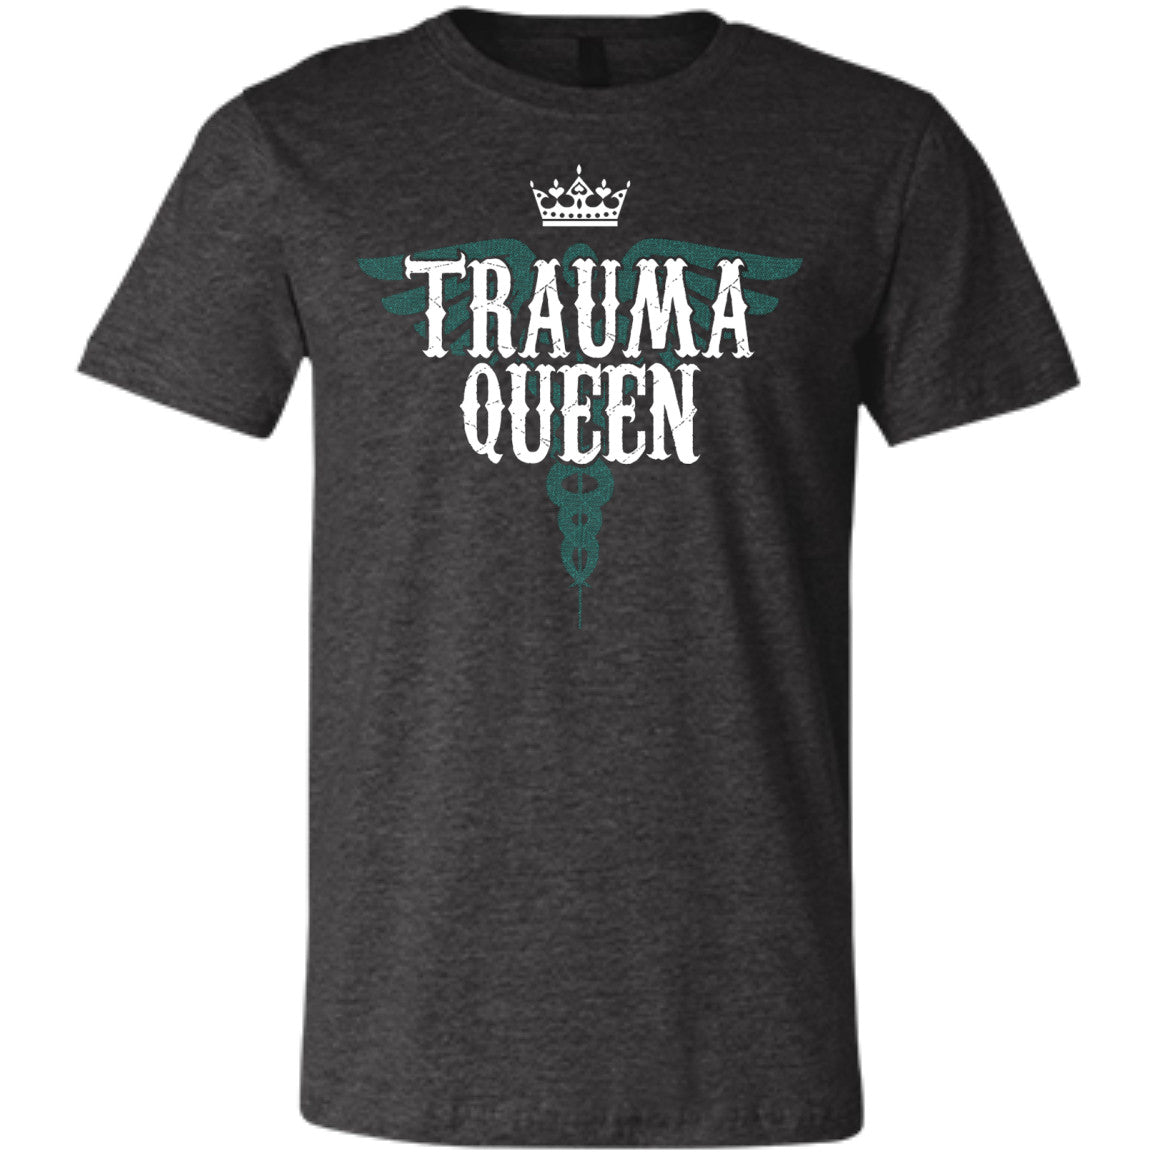 Trauma Queen Nurse Medic Shirts and Tanks - GoneBold.gift